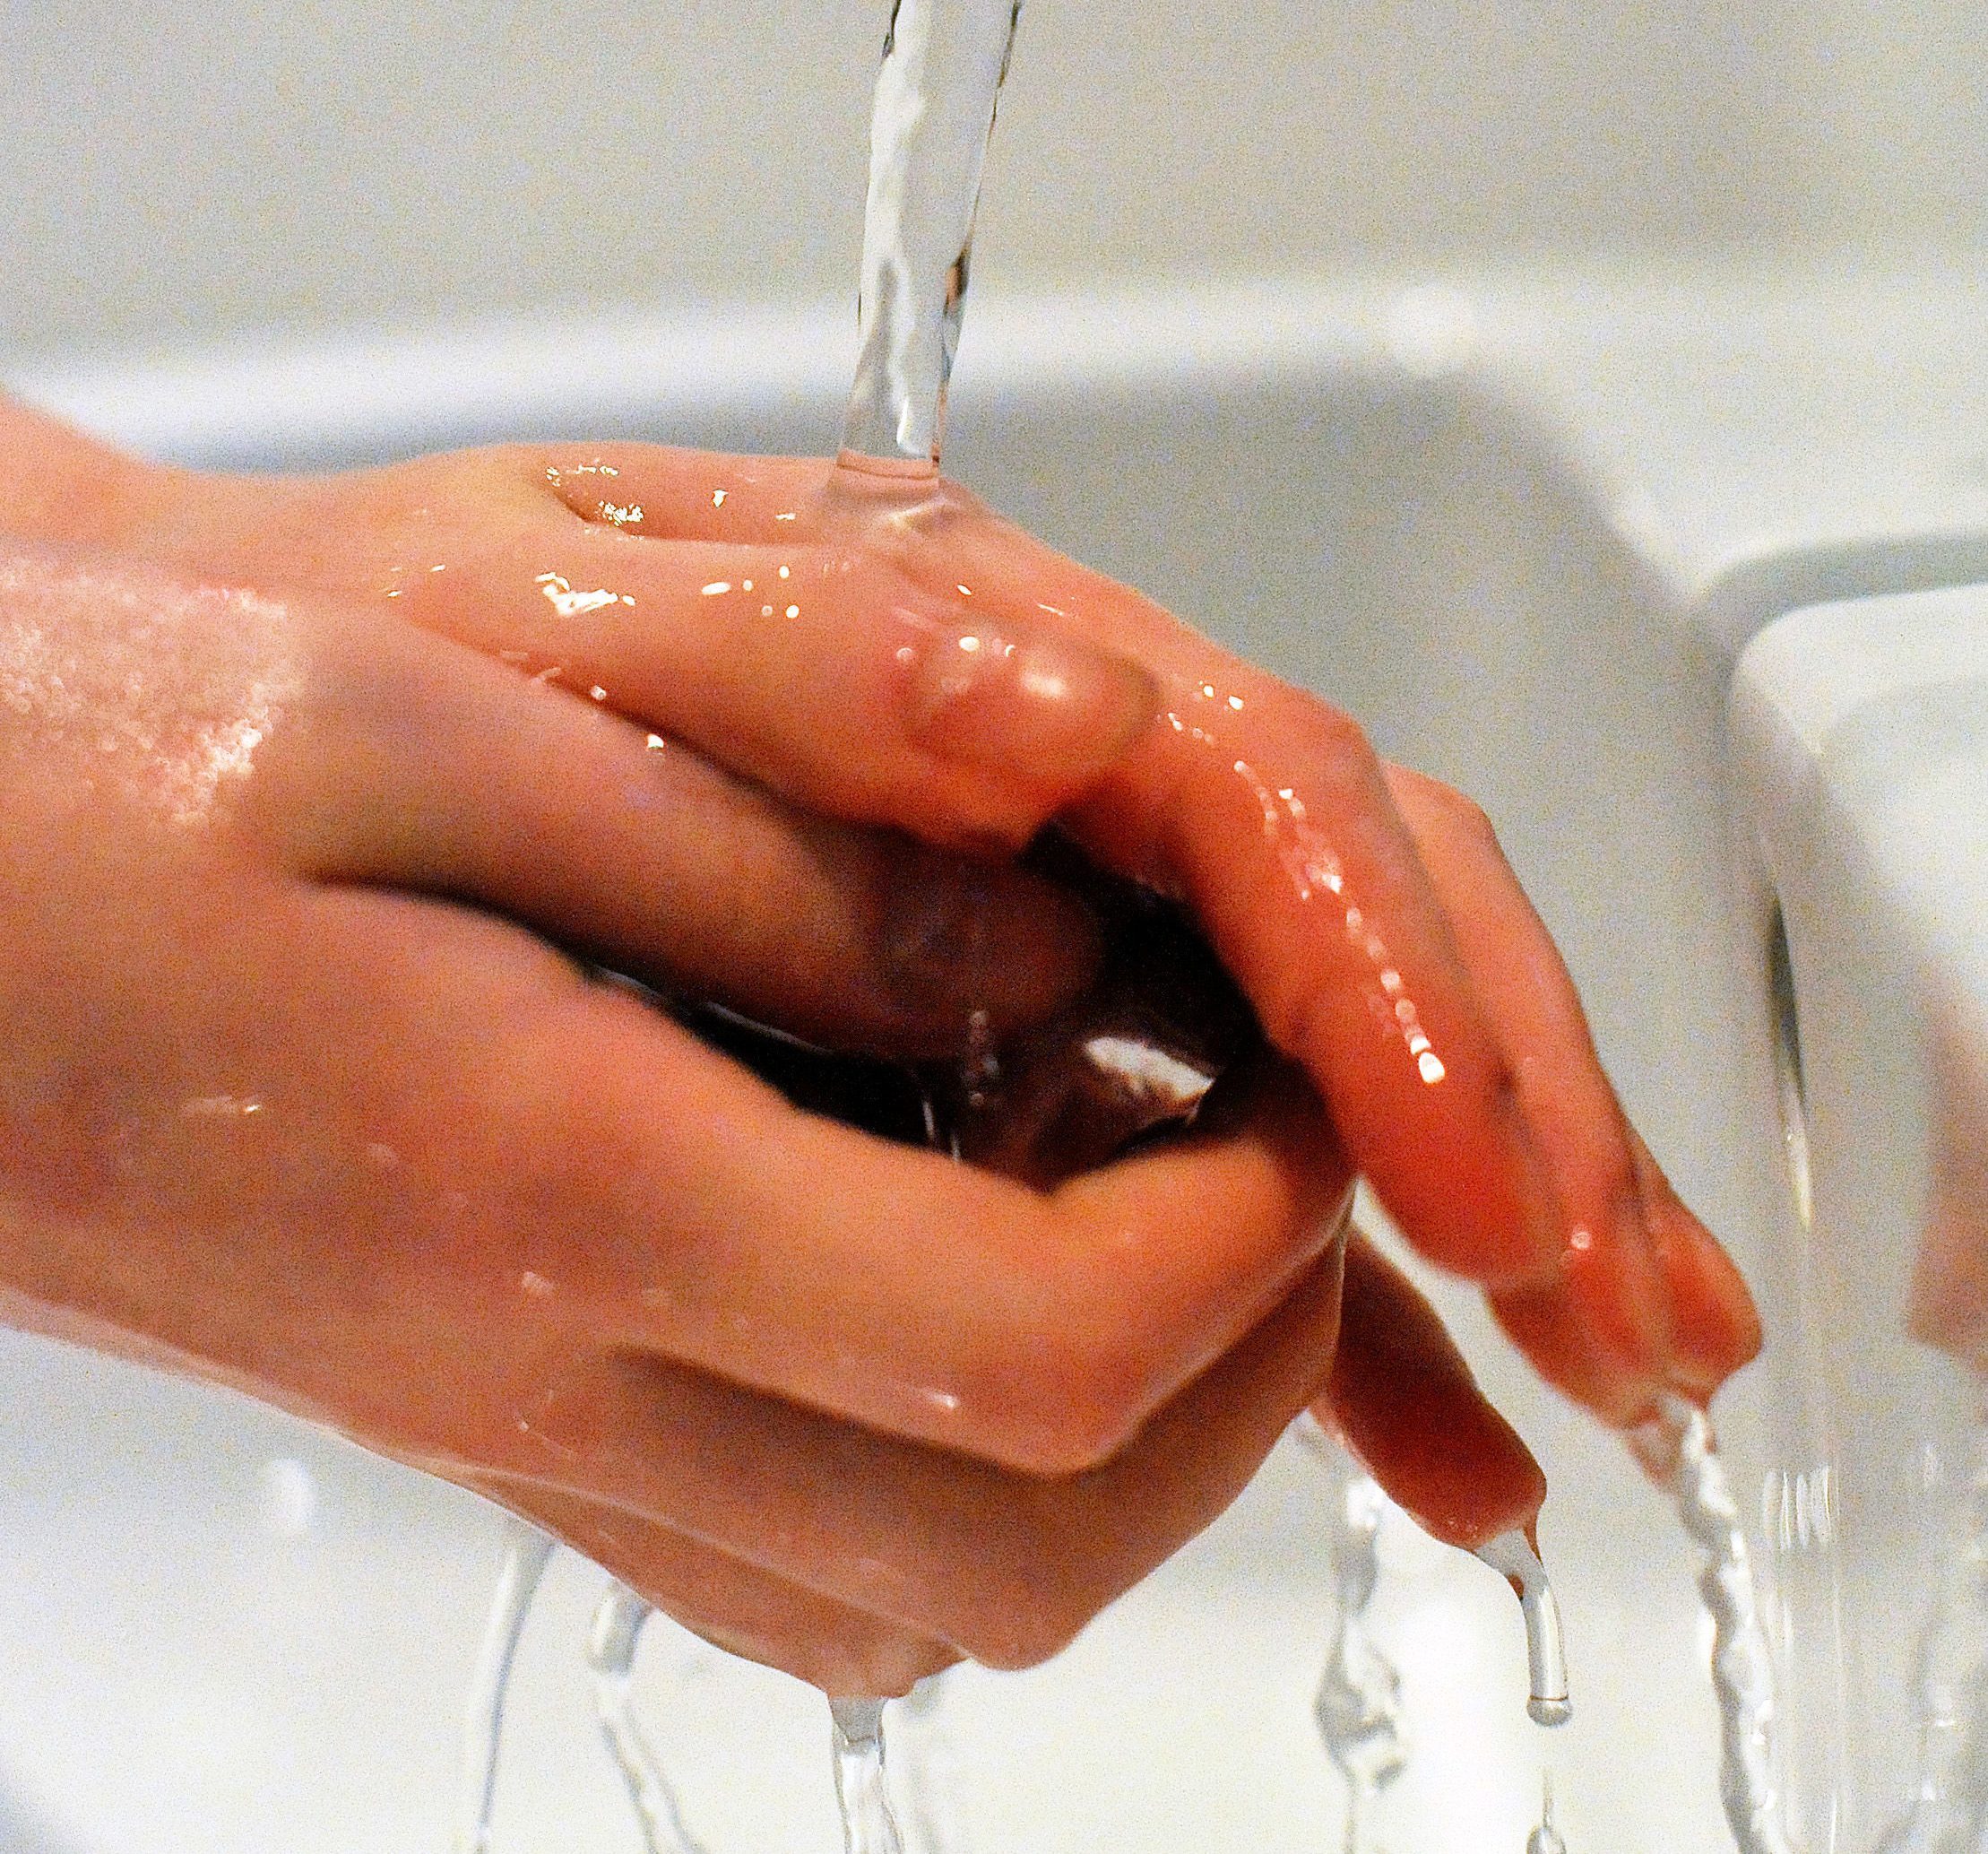 The Royal Pharmaceutical Society (RPS) said washing your hands for 20 seconds - the time it takes to sing Happy Birthday twice - was the only sure way of getting rid of viruses and bacteria that can cause colds, flu, infections and upset stomachs. (Nick Ansell/PA Wire)